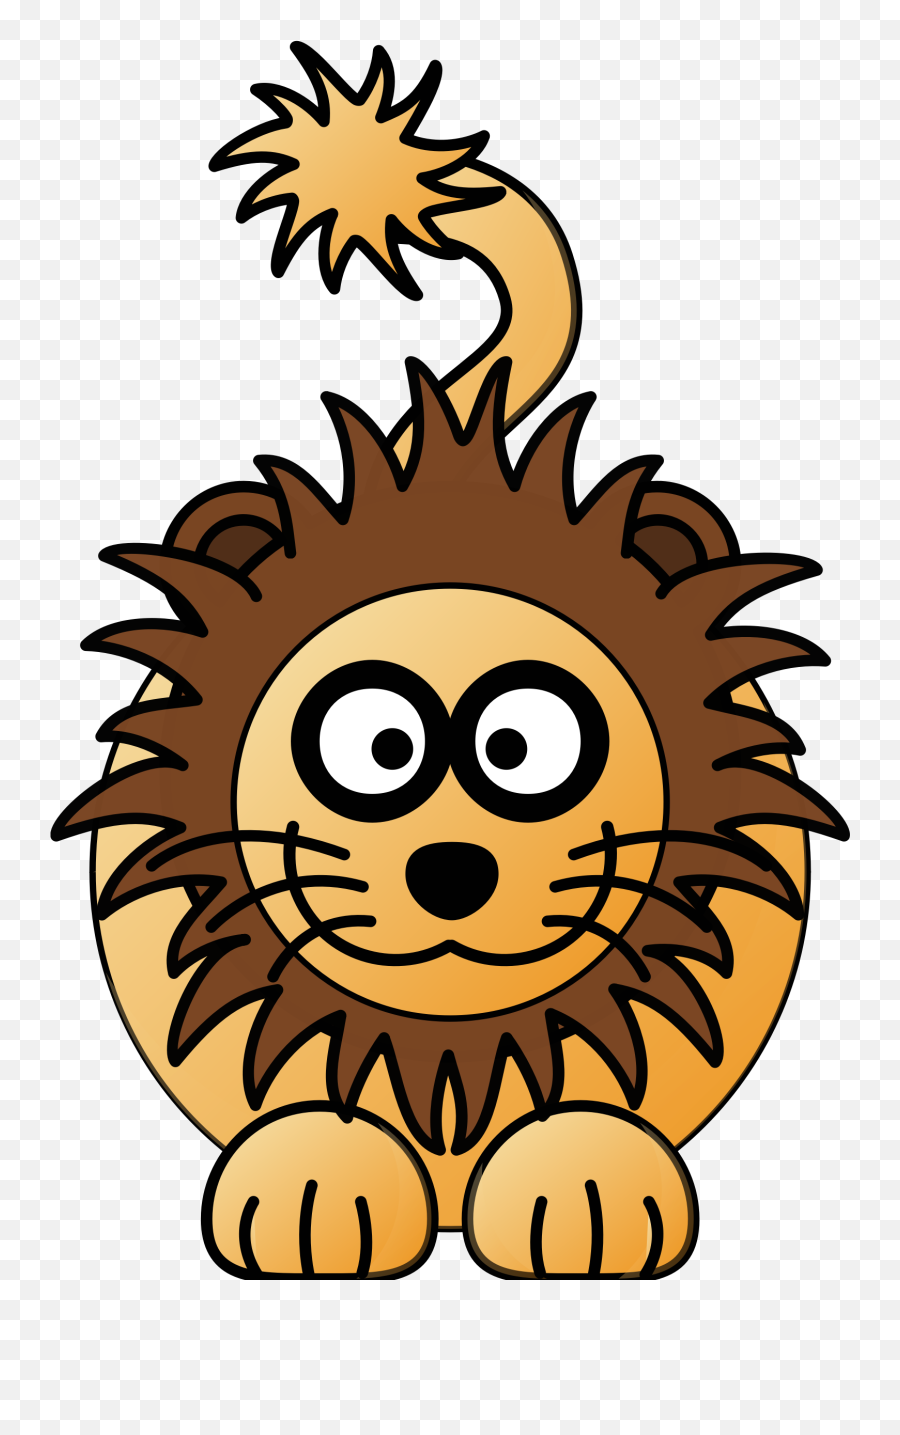 Lion Cartoon Drawing - Cartoon Lion Clker Clipart Full Cartoon Lion Clipart Emoji,Royalty Free Clipart For Commercial Use